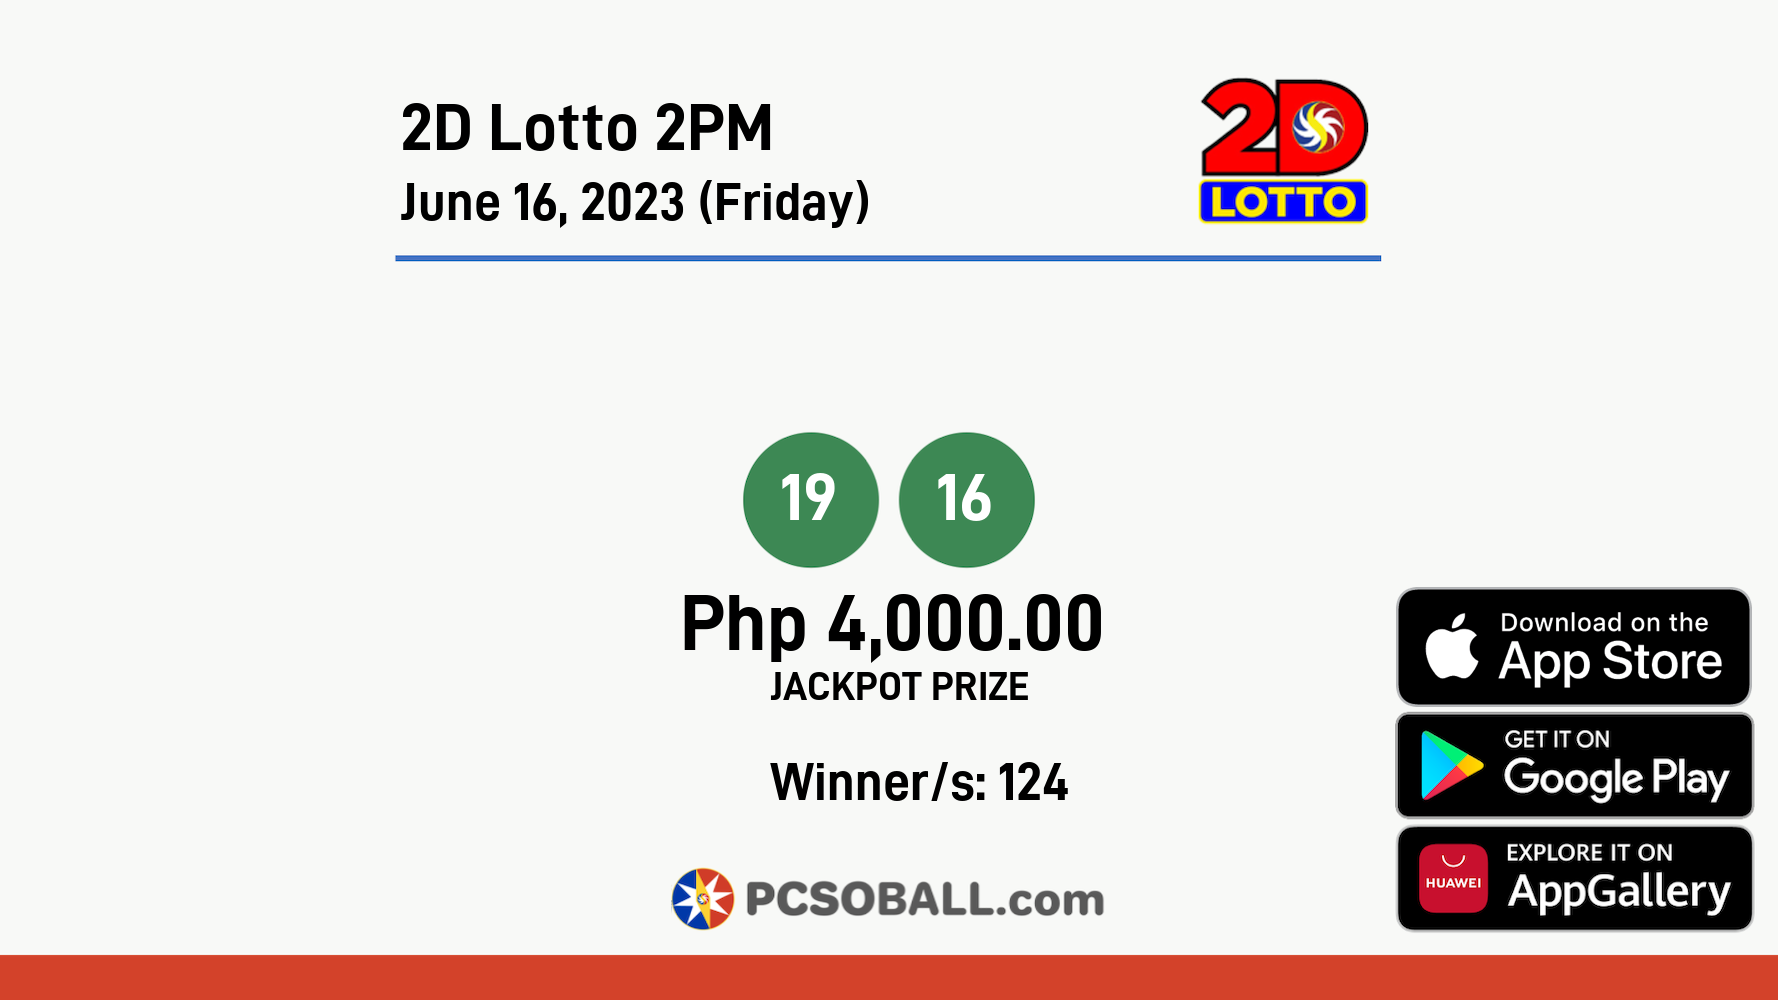 2D Lotto 2PM June 16, 2023 (Friday) Result